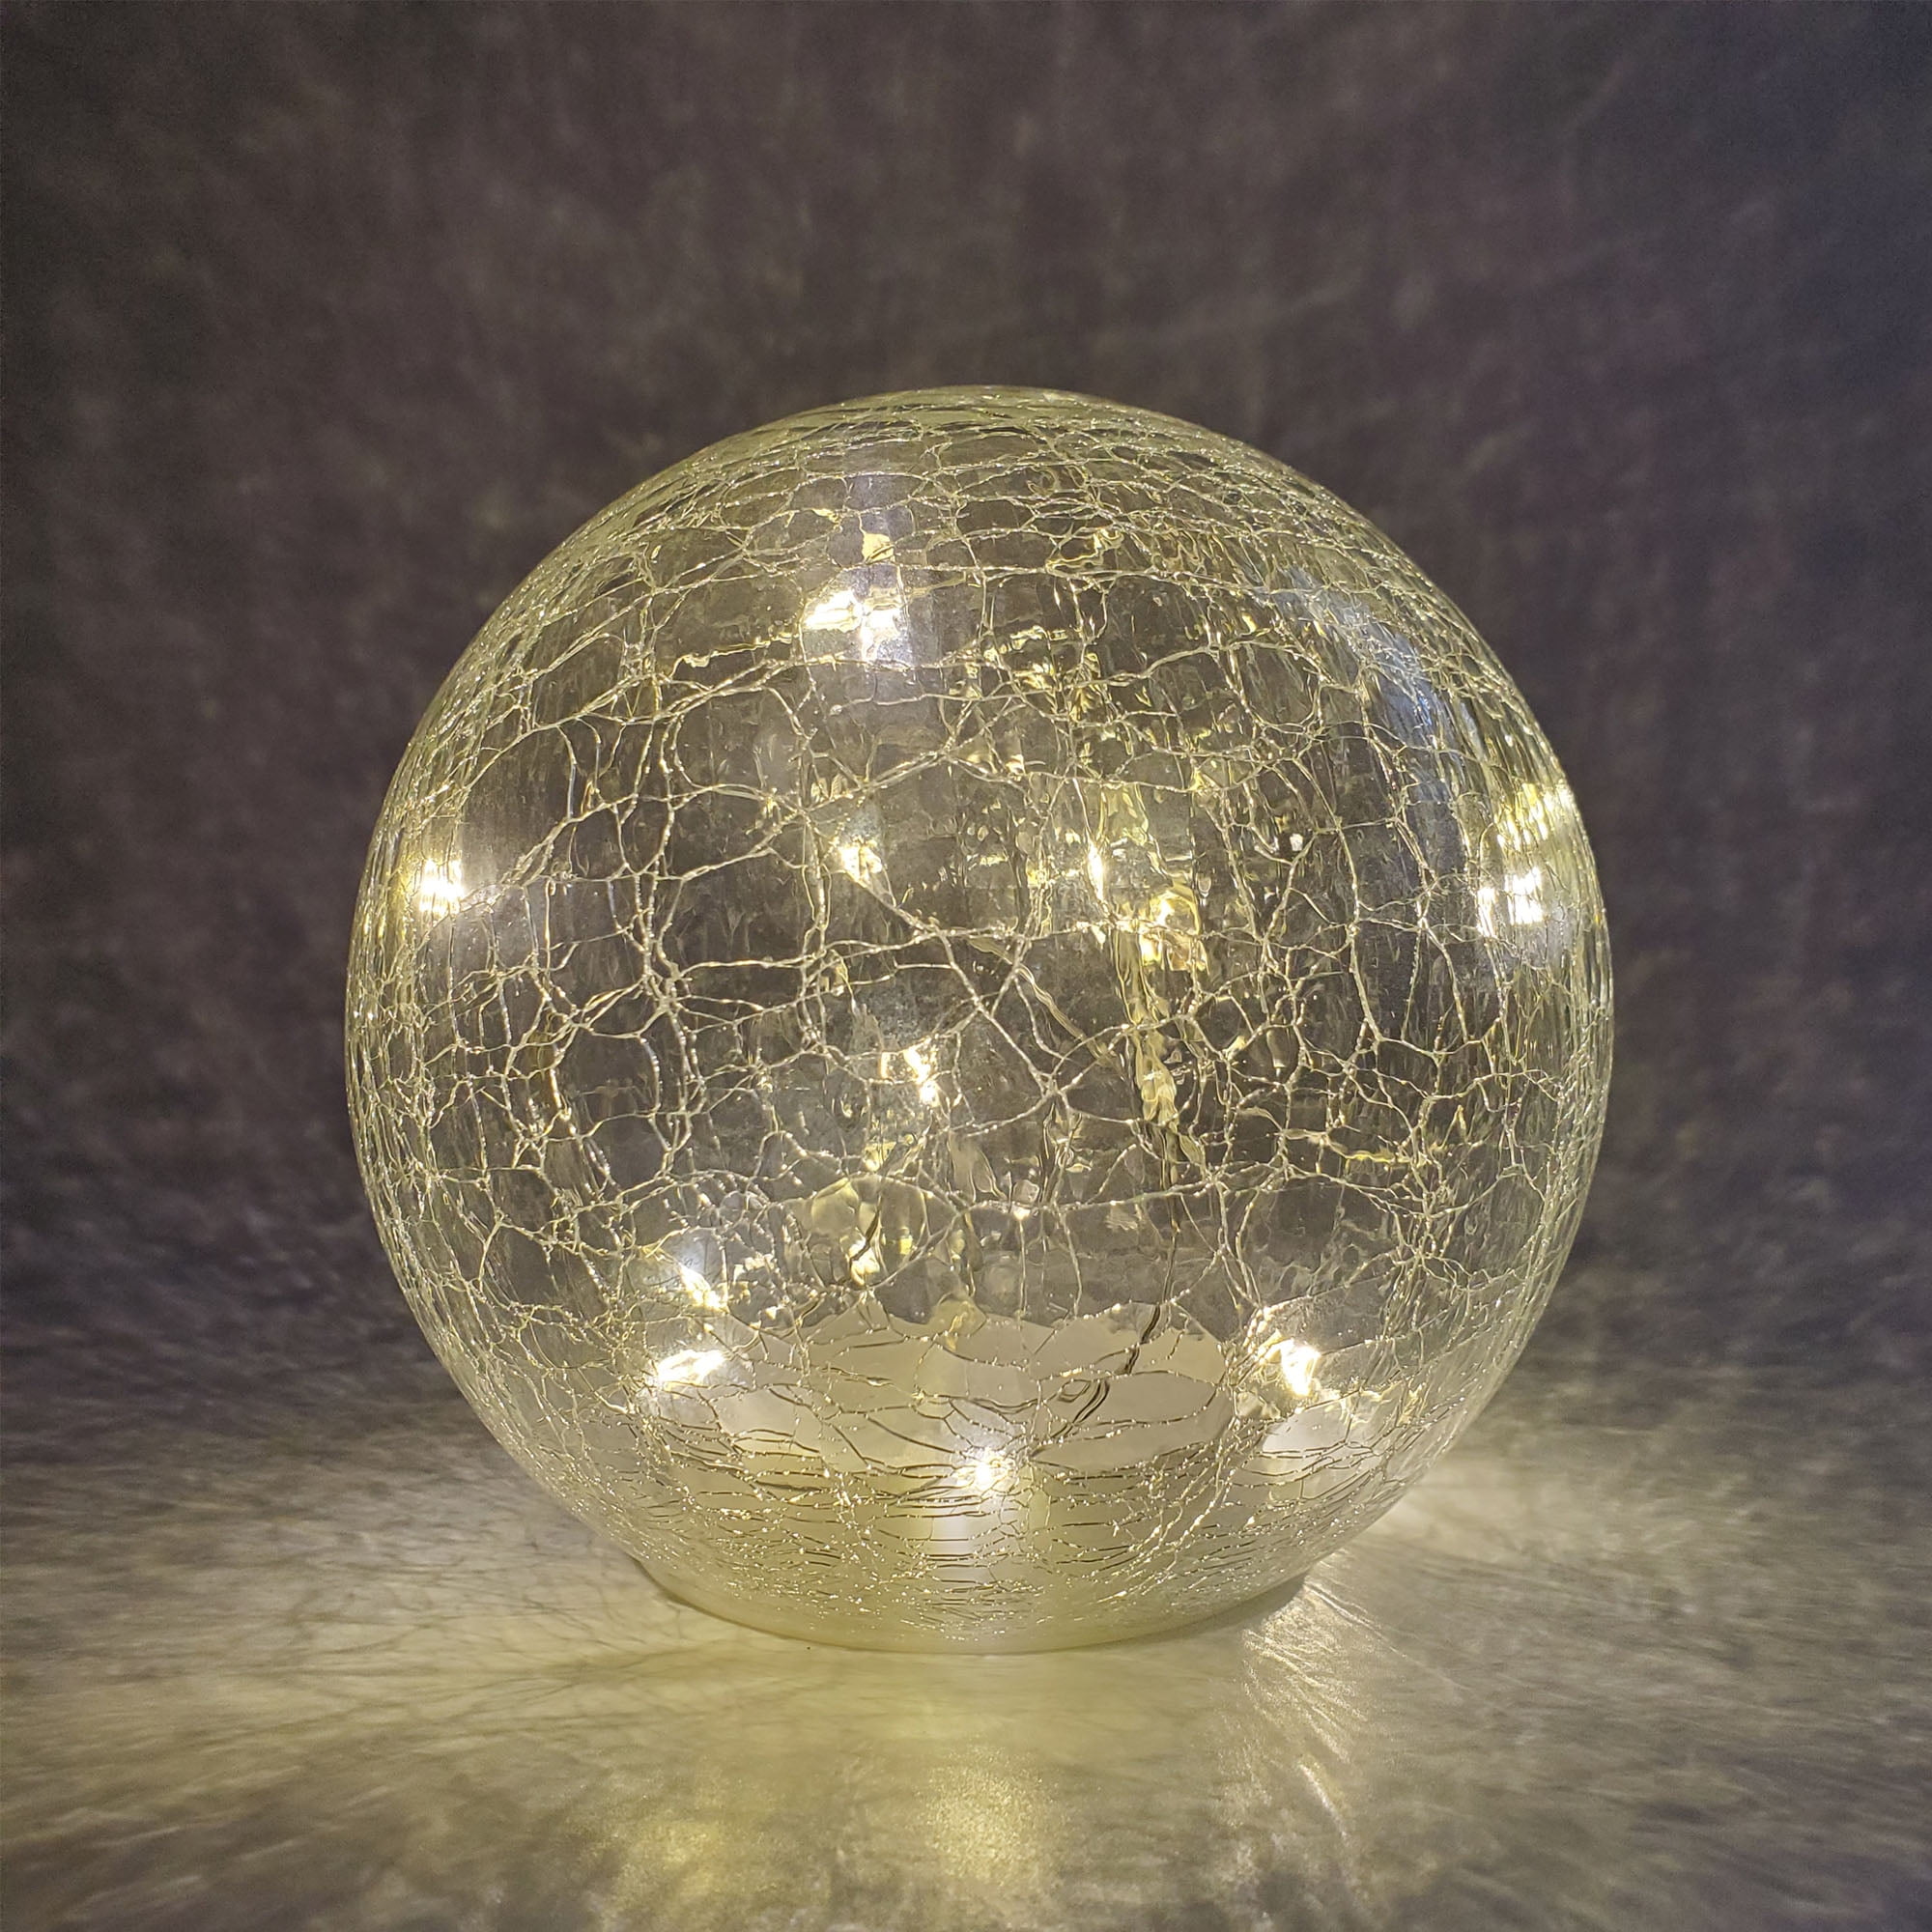 KAOWOD Crackle Globe LED Lamp Battery Operated, Lighted